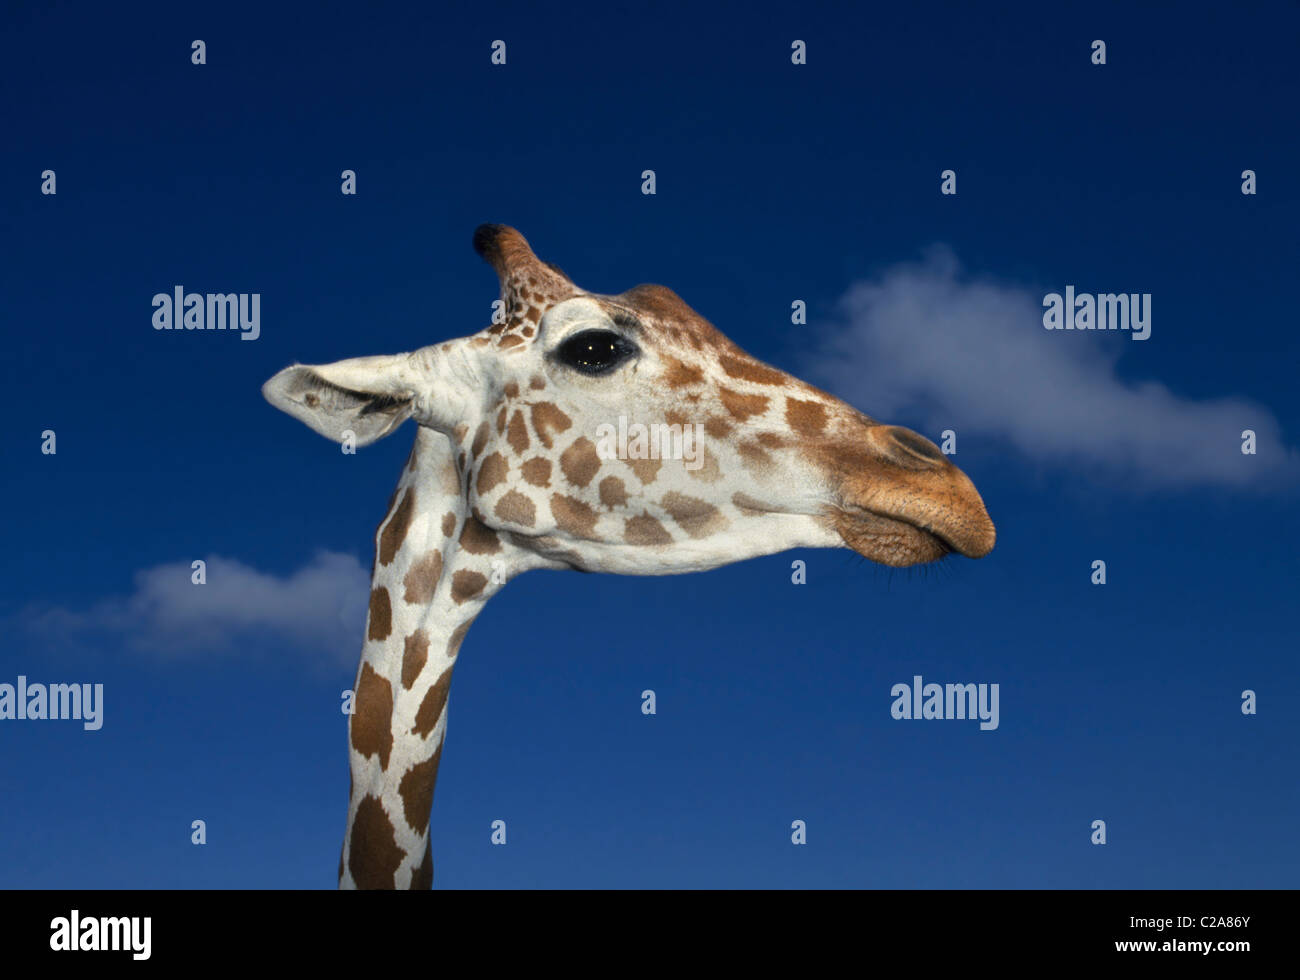 An African reticulated giraffe stretches its long neck to stare at visitors to Busch Gardens, an animal & adventure theme park in Tampa, Florida, USA. Stock Photo